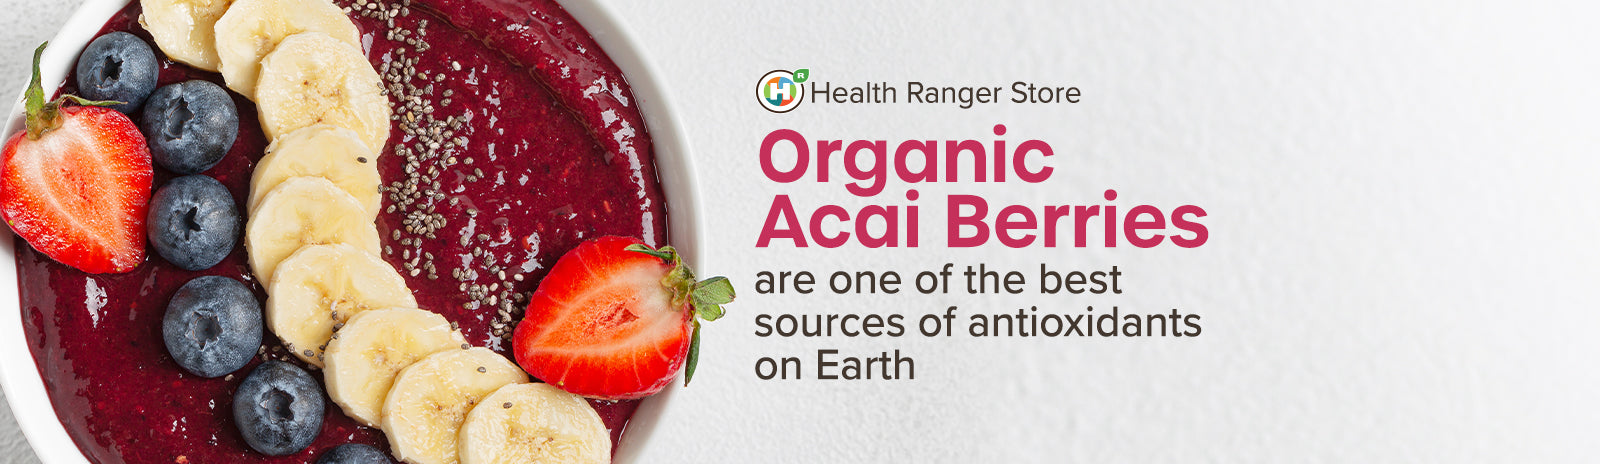 Organic Acai Berries are one of the best sources of antioxidants on Earth